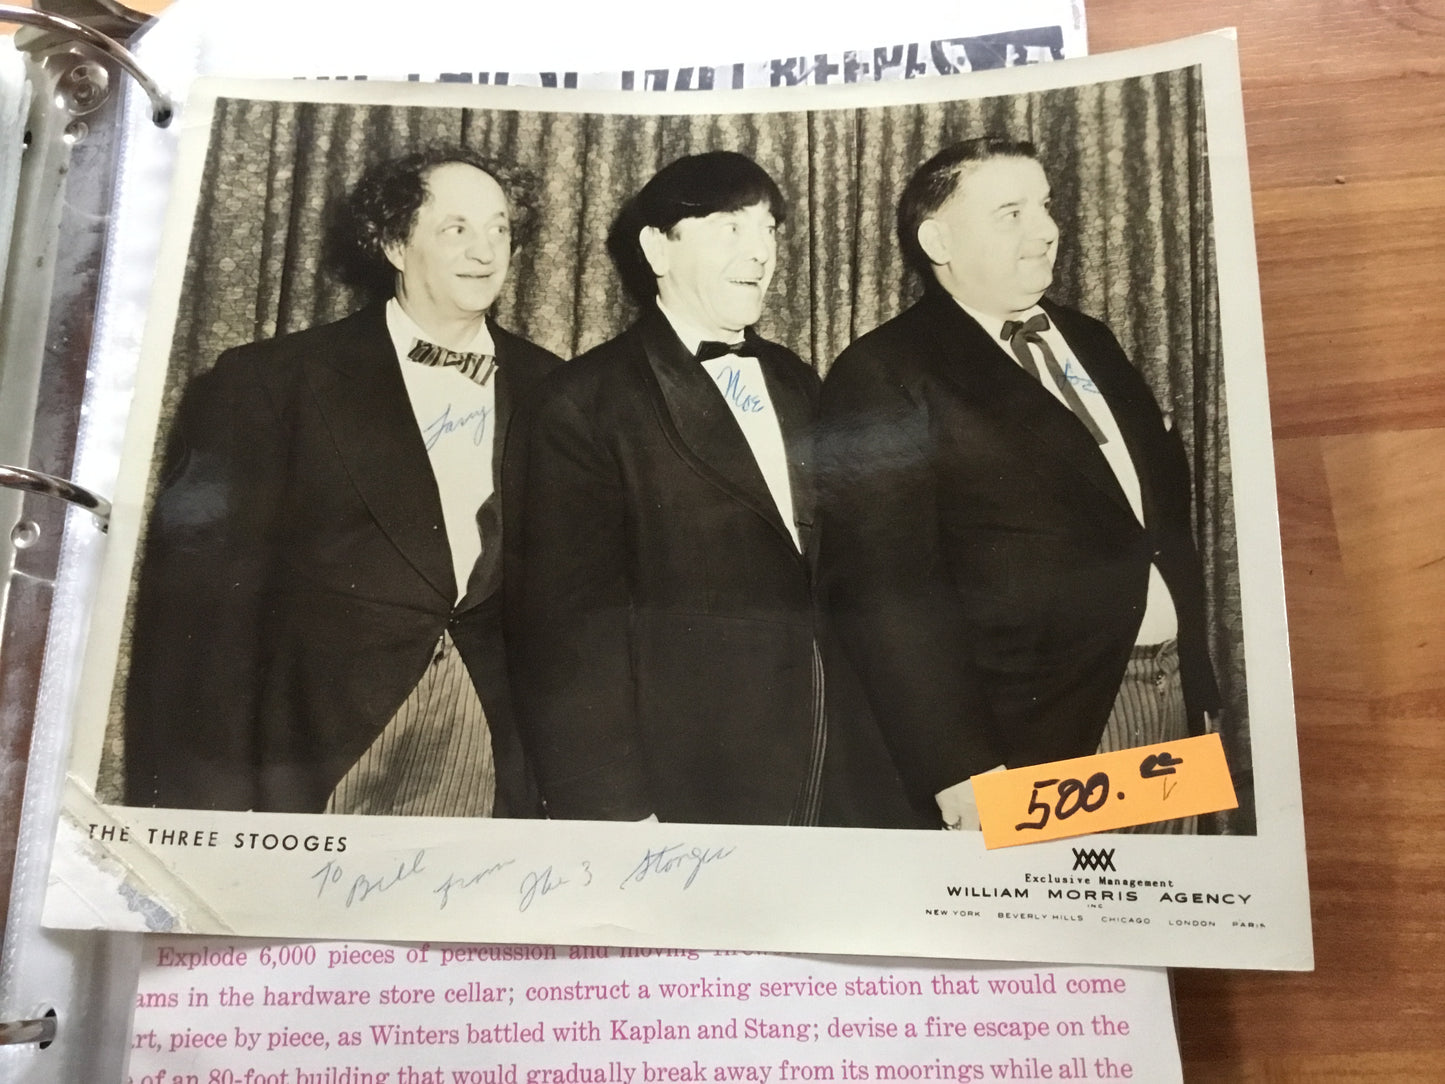 The Three Stooges (More Howard, Larry Fine and Joe) autographs